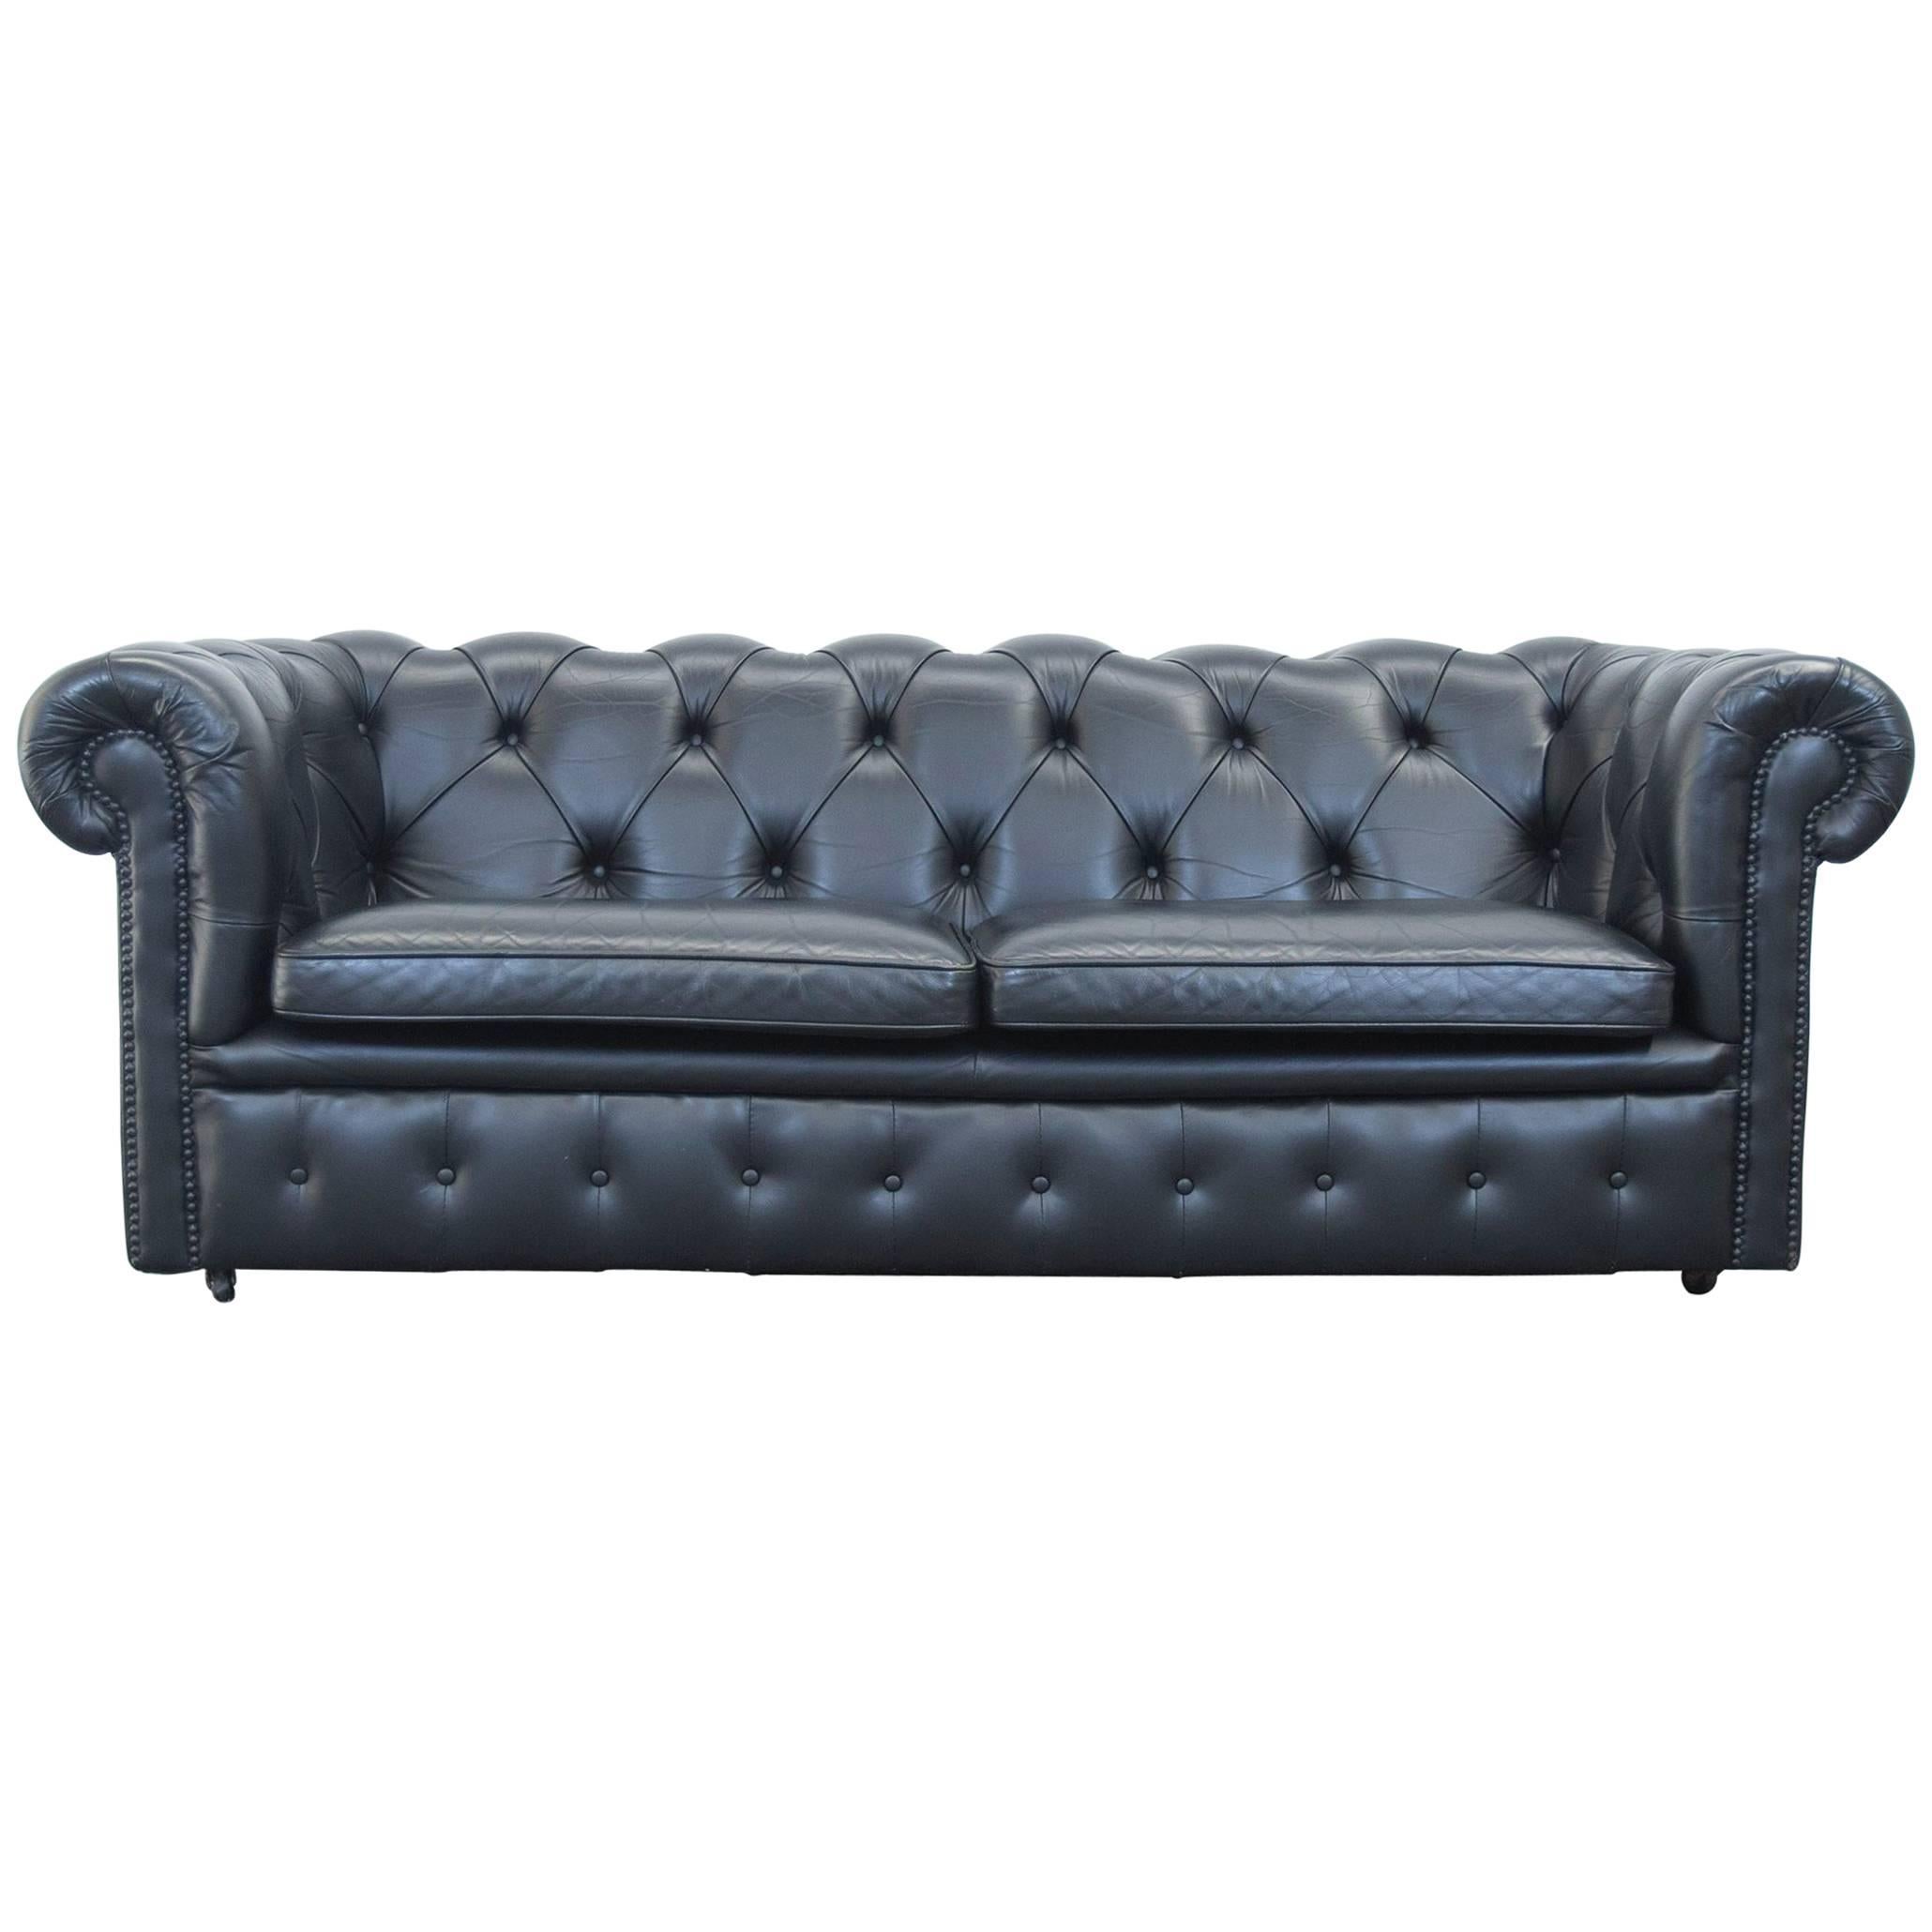 Springvale Chesterfield Sofa Black Leather Two-Seat Couch Vintage Retro